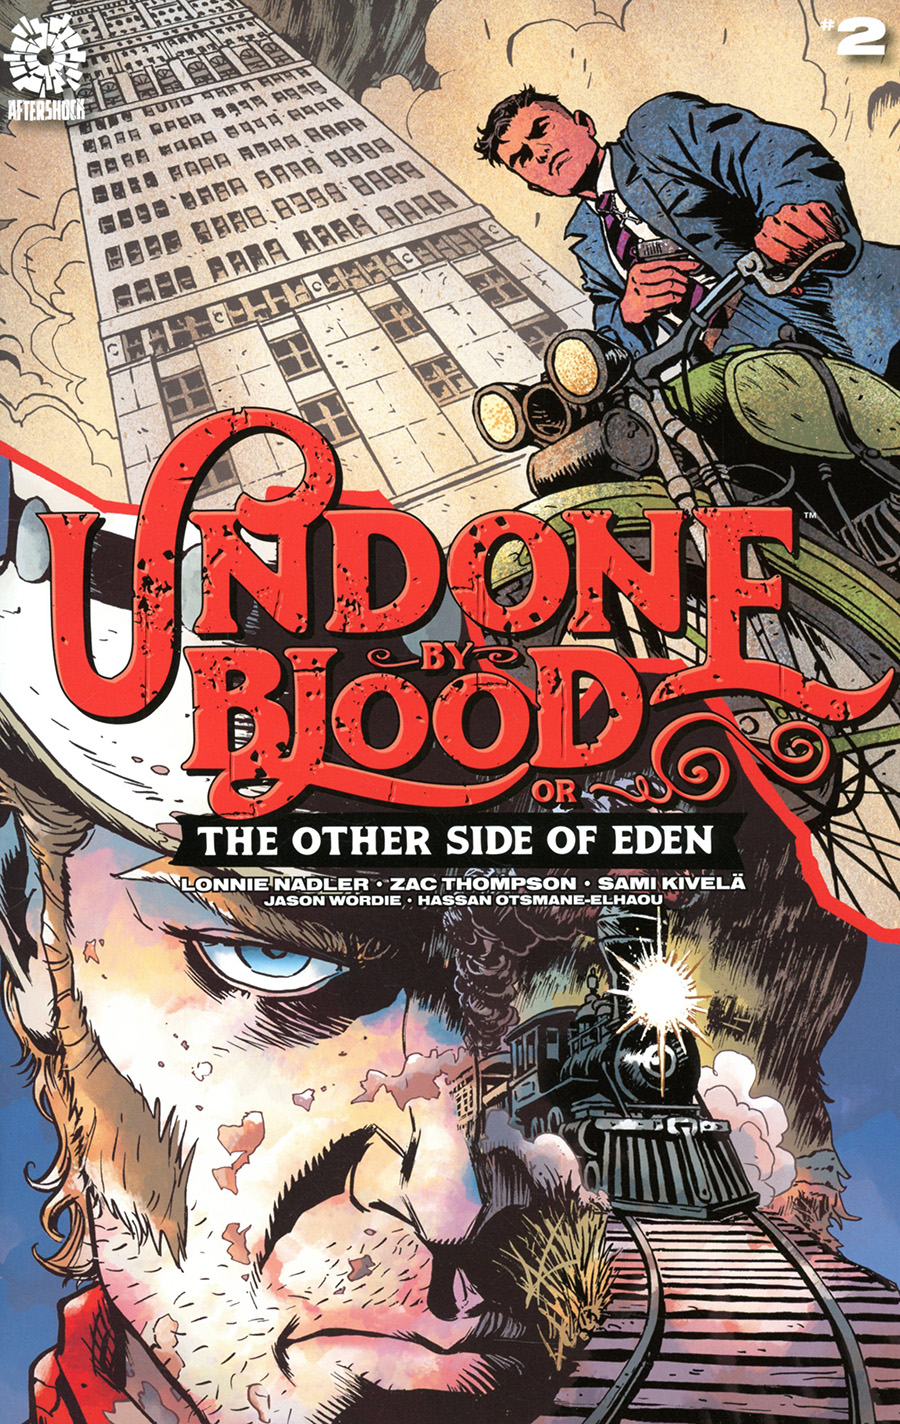 Undone By Blood Or The Other Side Of Eden #2